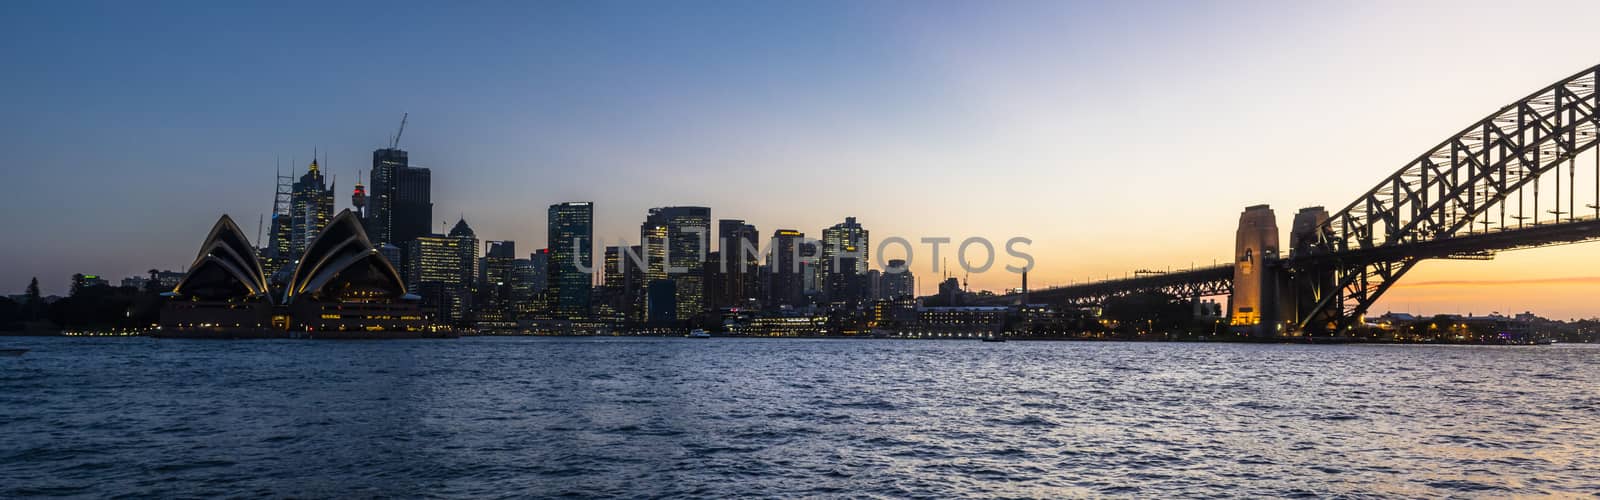 Sydney, NSW - Oct 2018: Panoramic view of the bay at sunset by mauricallari